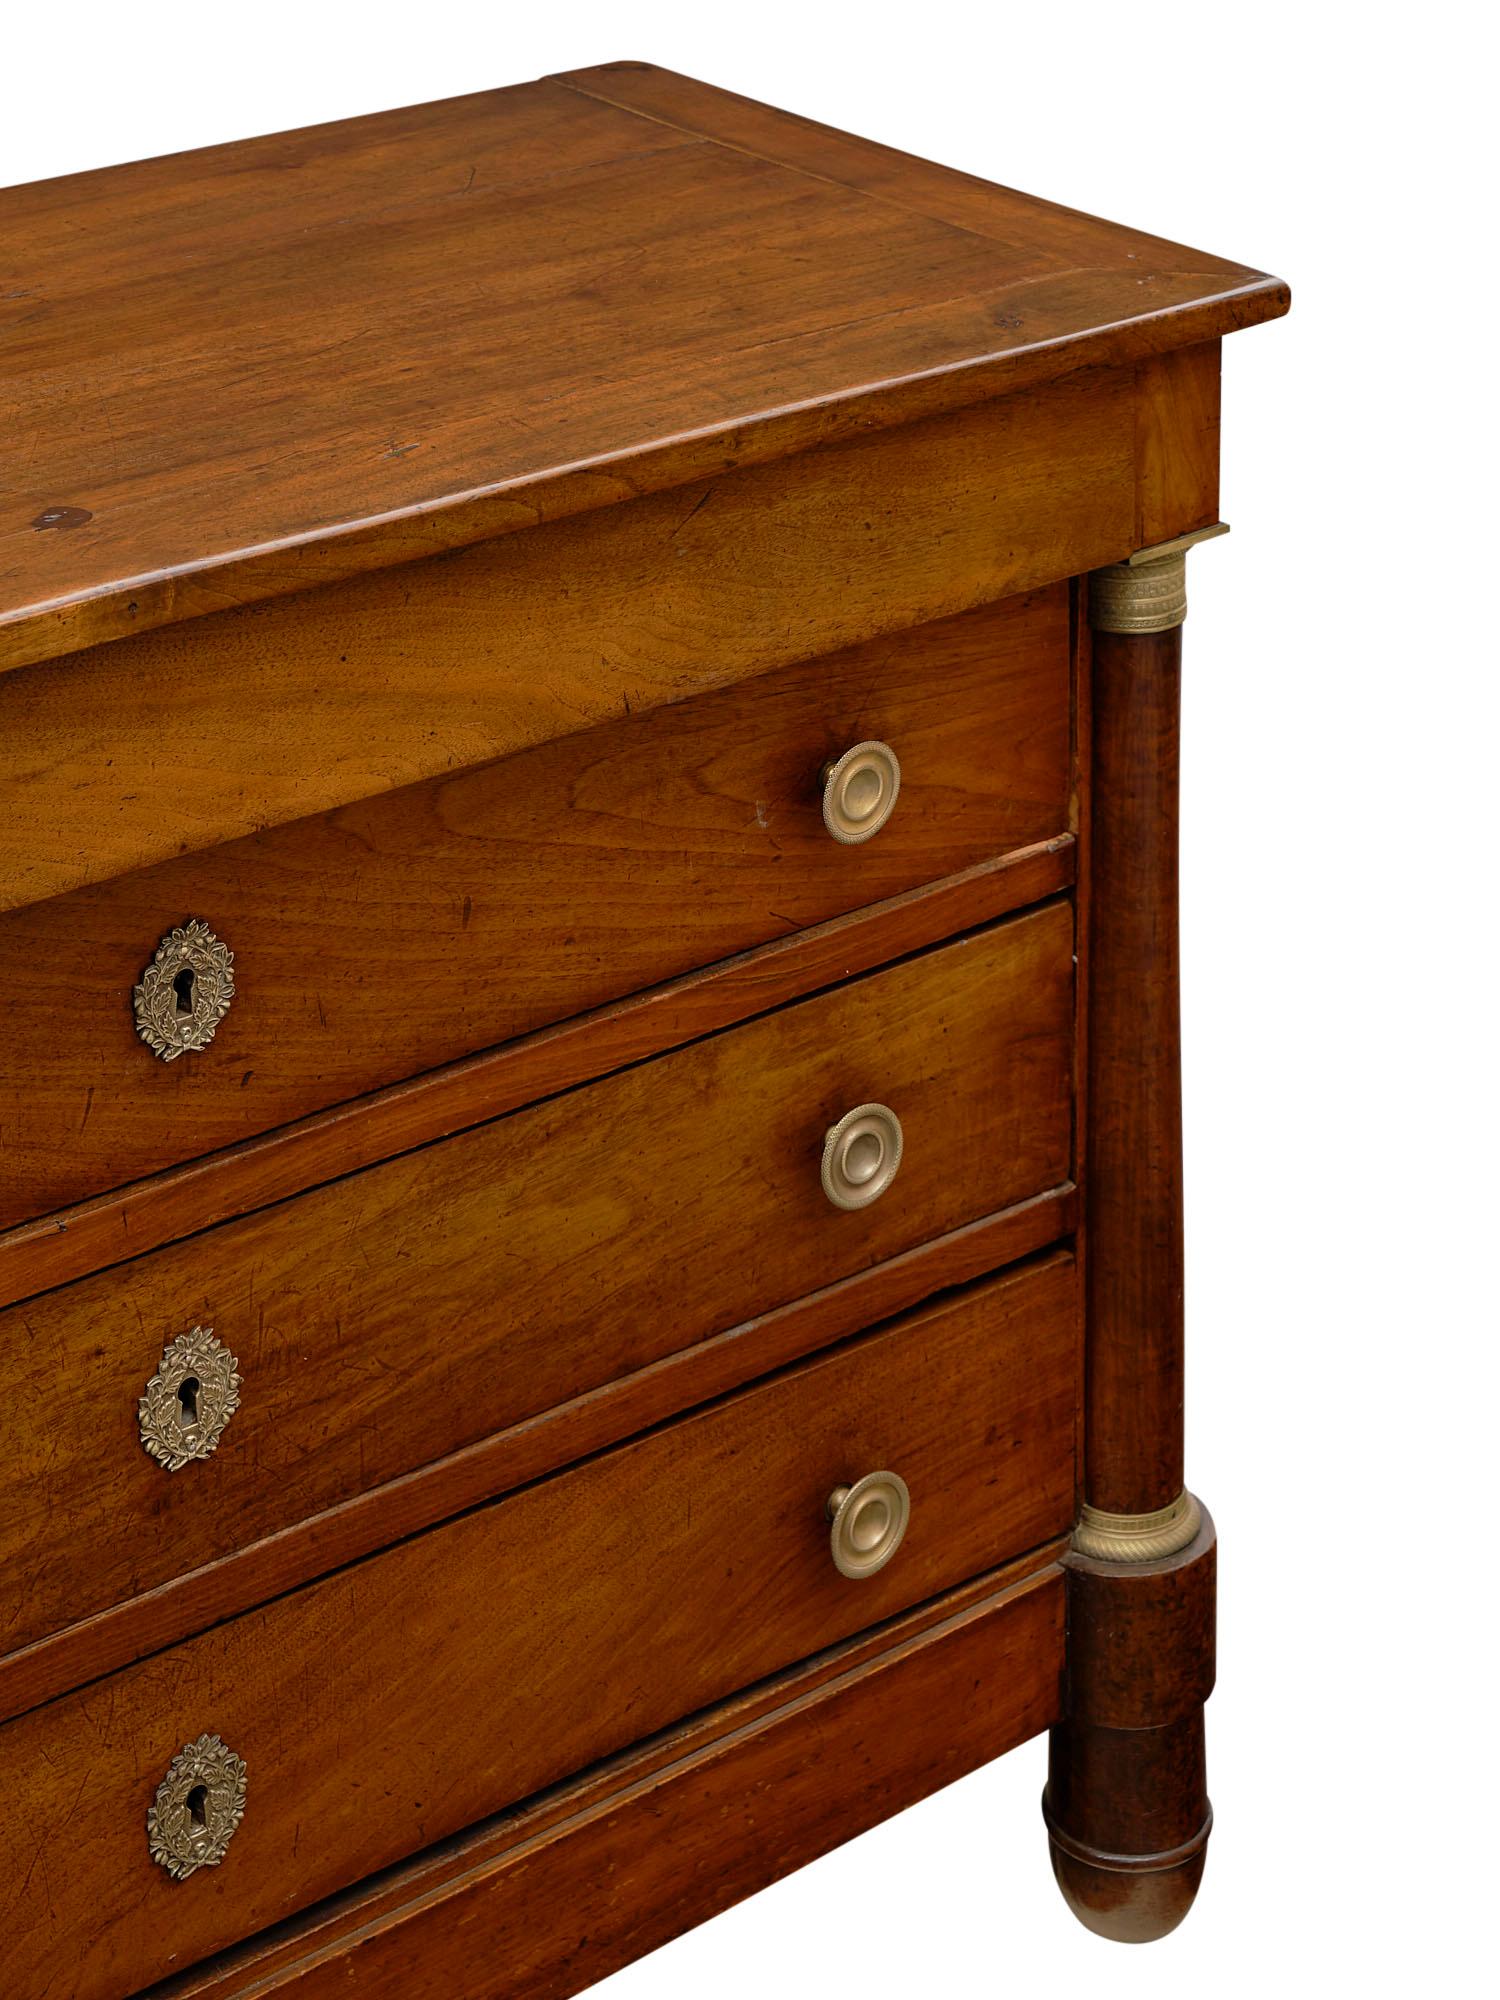 Polished Empire Period Antique Chest of Drawers